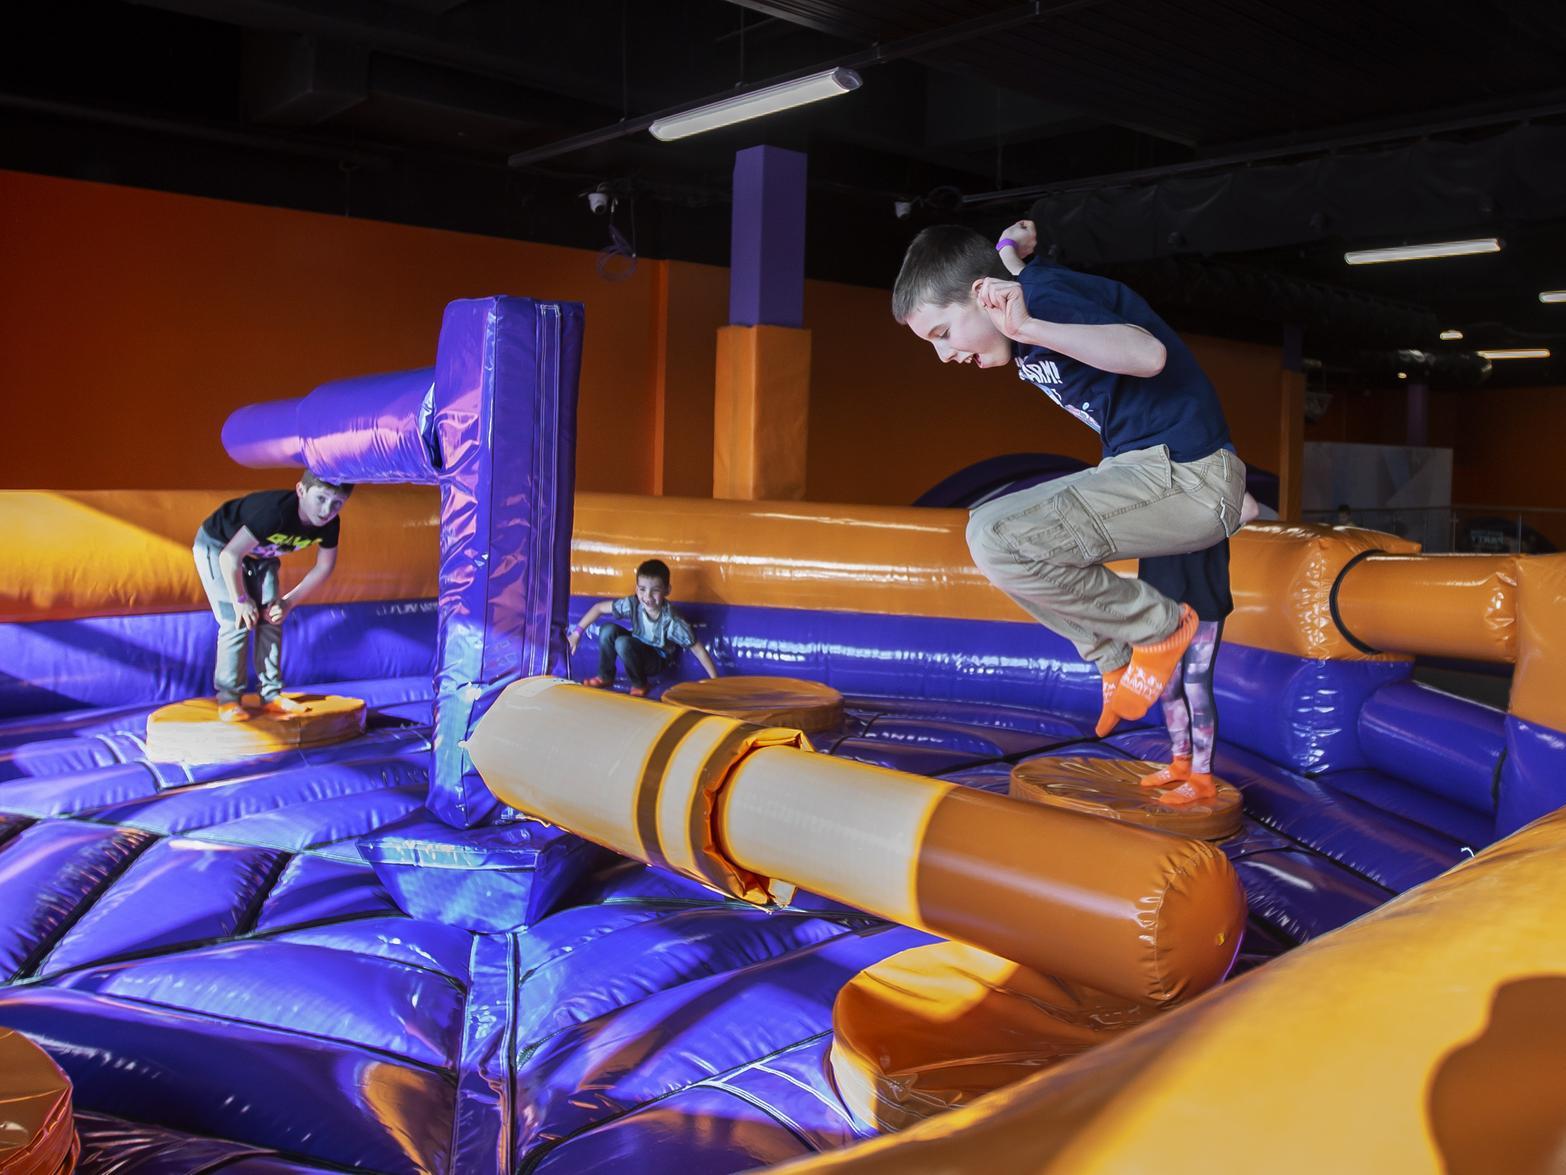 The Total Wipeout-inspired spinning arm obstacle course at Gravity in Sol Central